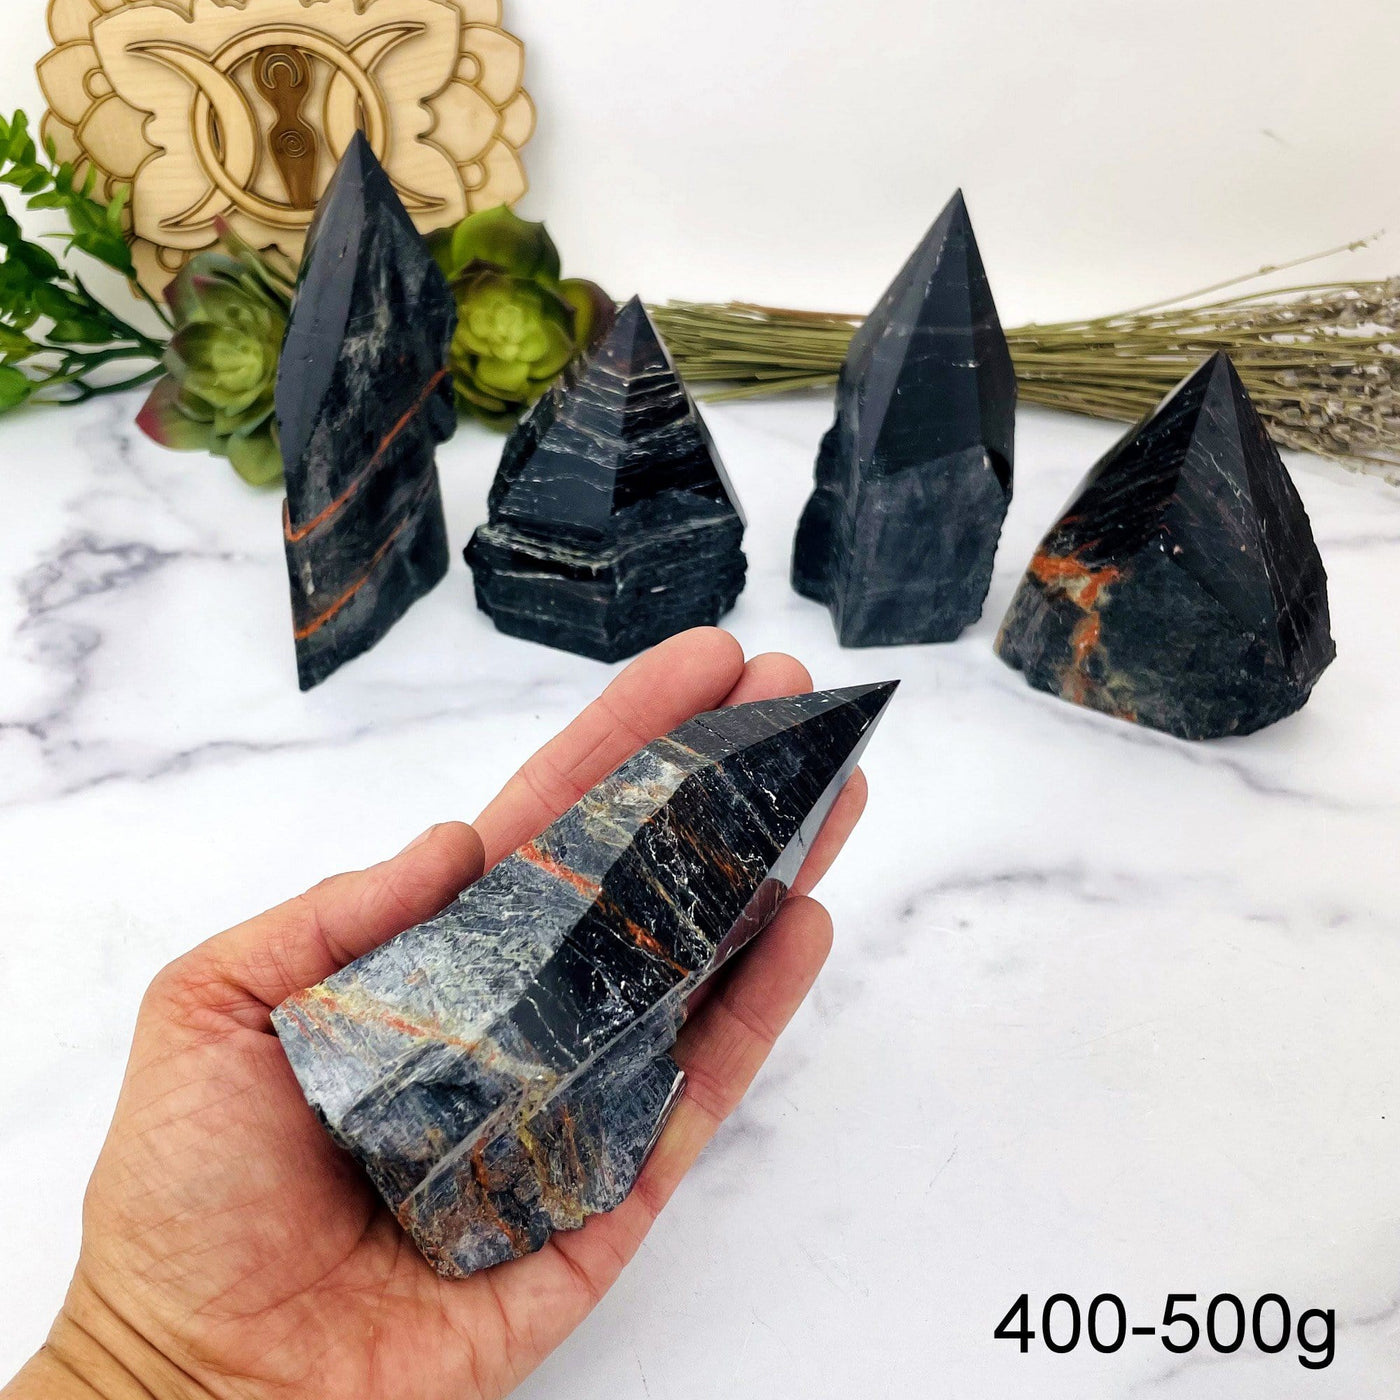 Black Tourmaline with Red Hematite Veins Semi Polished Points weight in 400-500g in hand for size reference